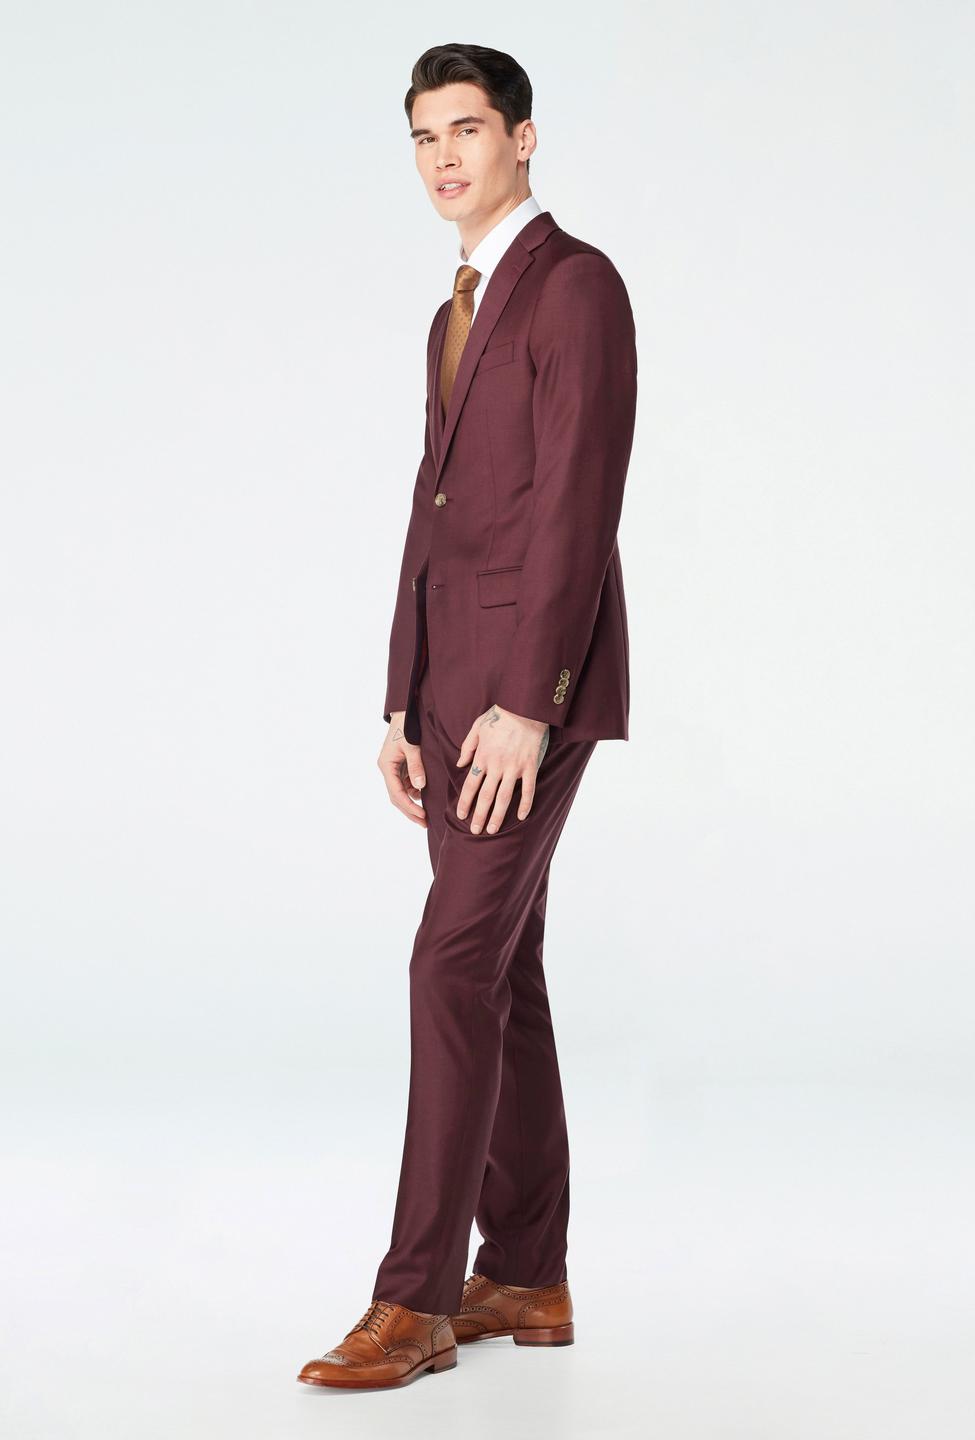 Burgundy suit - Hemsworth Solid Design from Premium Indochino Collection